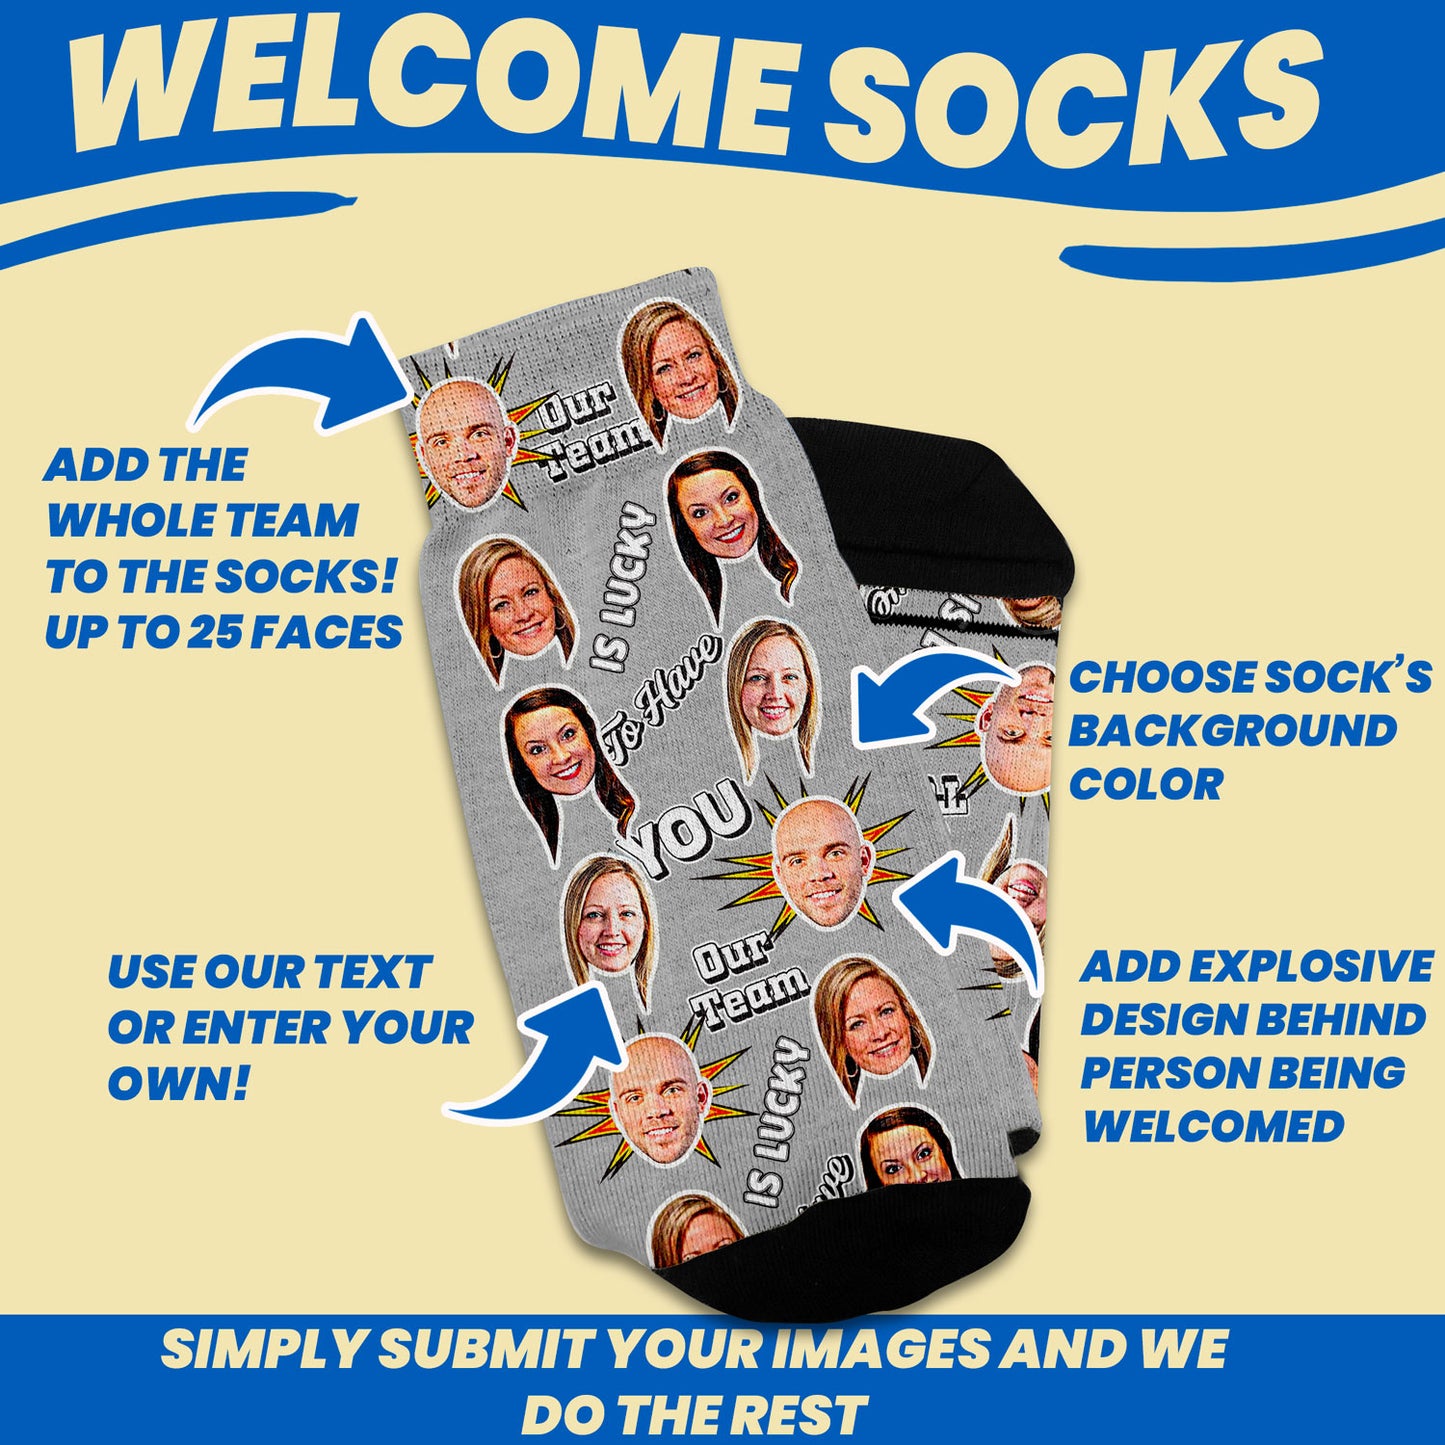 welcome to the team personalized gift socks with faces design features with 25 faces to decorated on socks, custom text and sock colors